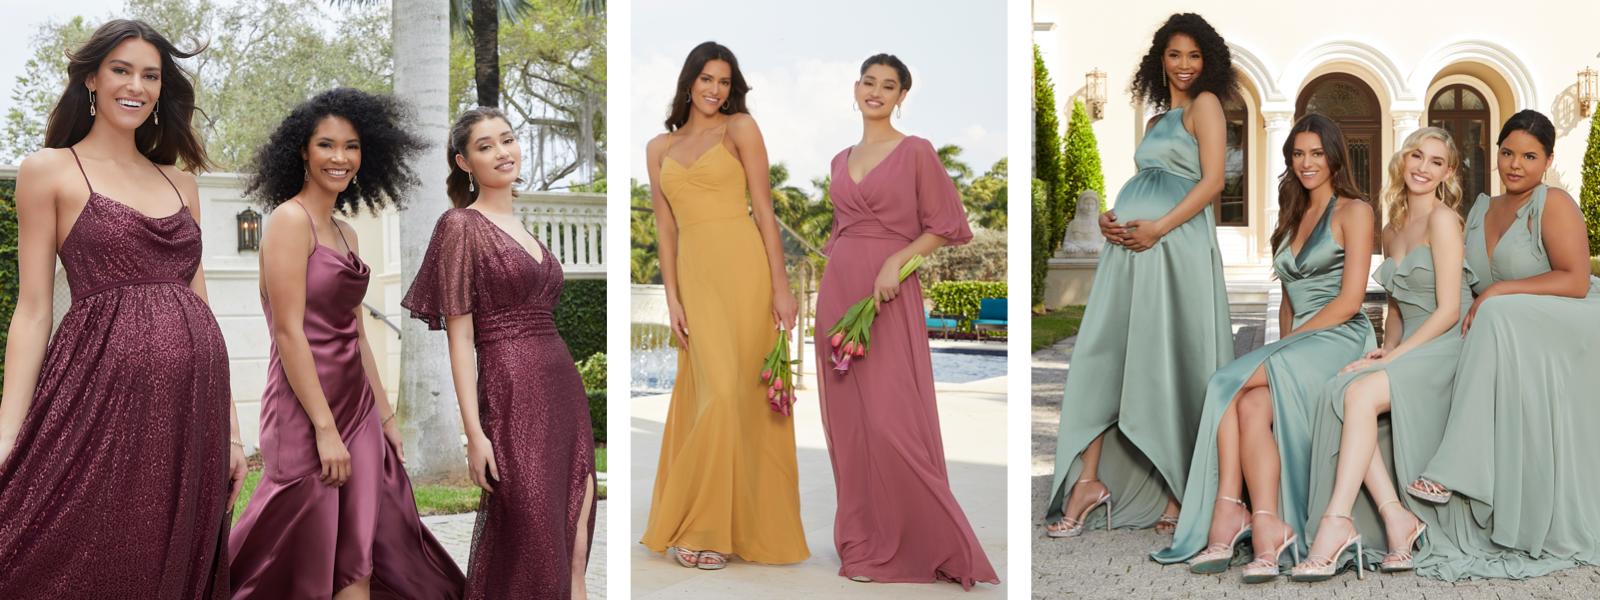 Morilee Bridesmaids Dresses Wedding Chattanooga Cleveland Dalton Boutiques Tennessee TN Georgia GA Lowest Prices Sale Discount A-Line Fit-And-Flare Mermaid Sheath Sexy Empire Sweetheart illusion strapless halter v-neck bateau pretty hair nails gorgeous